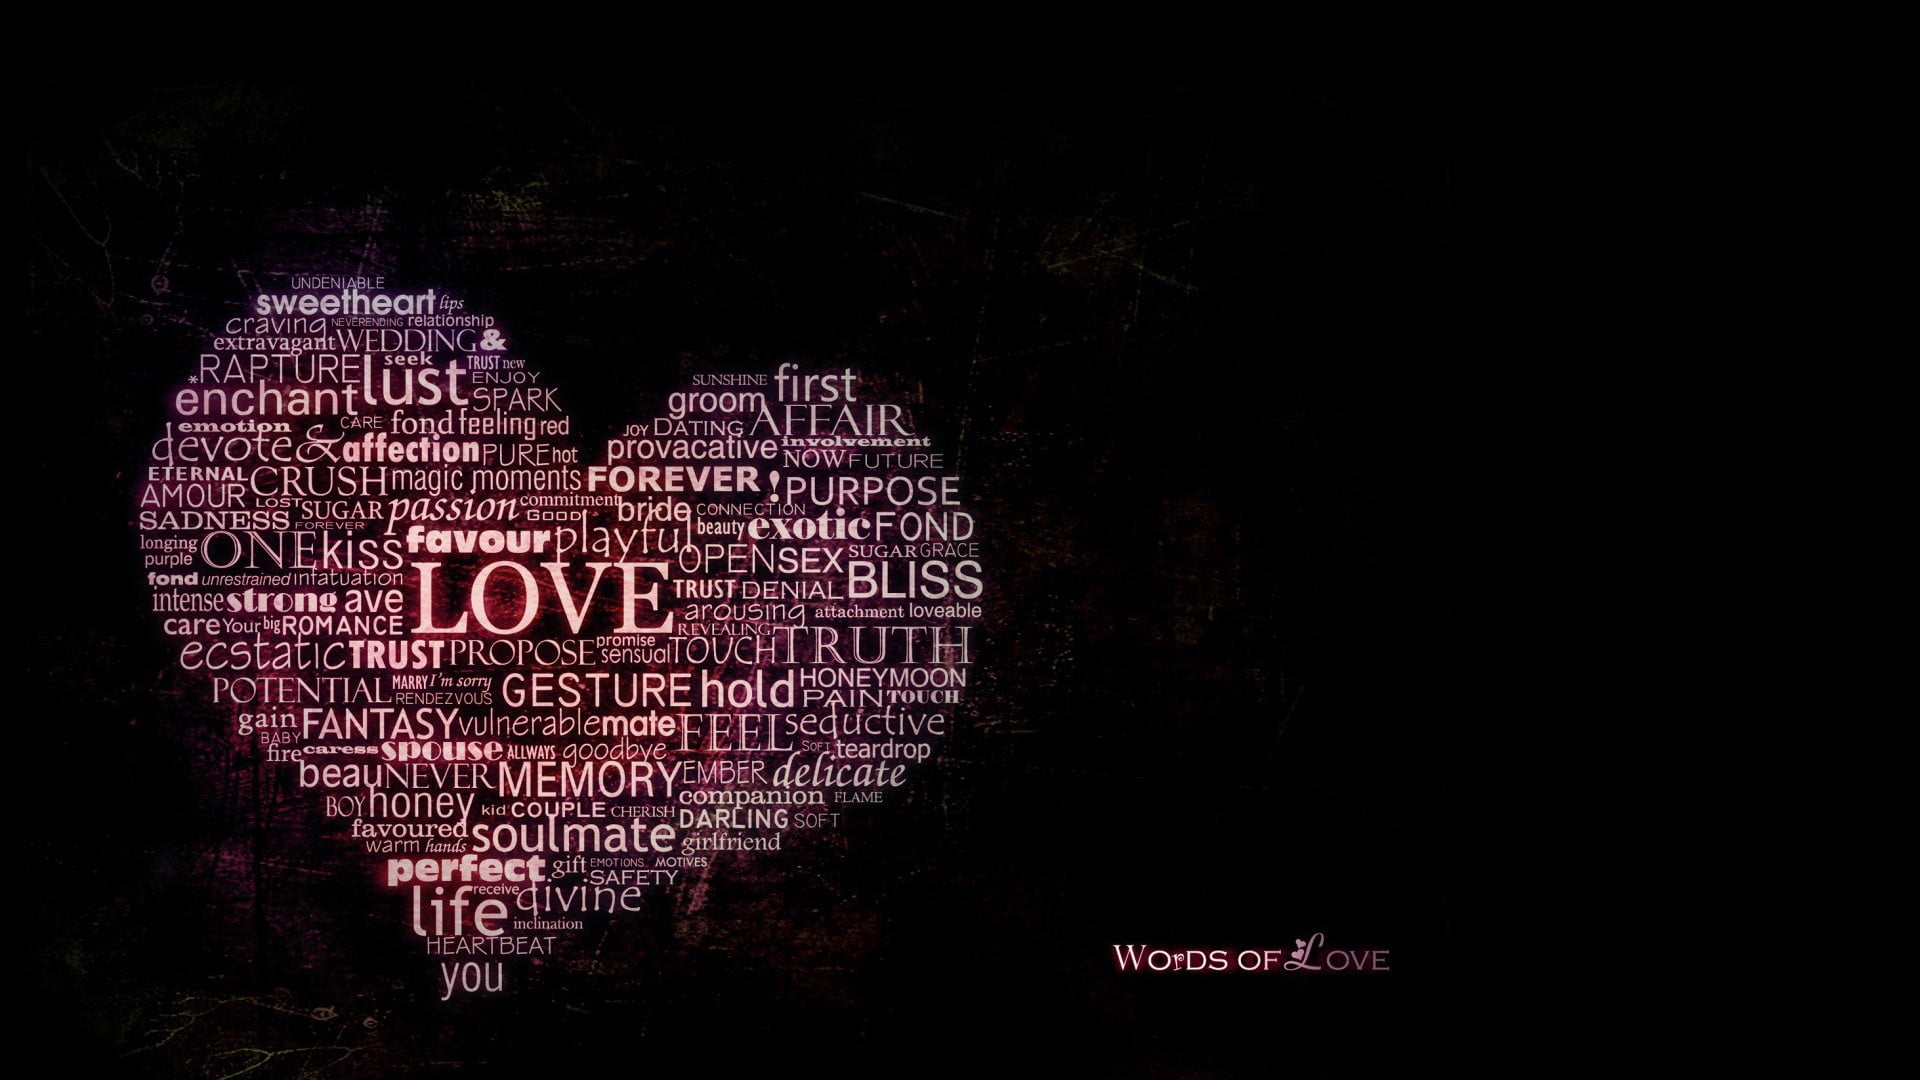 heart-shaped texts, typography, text, word clouds, black background